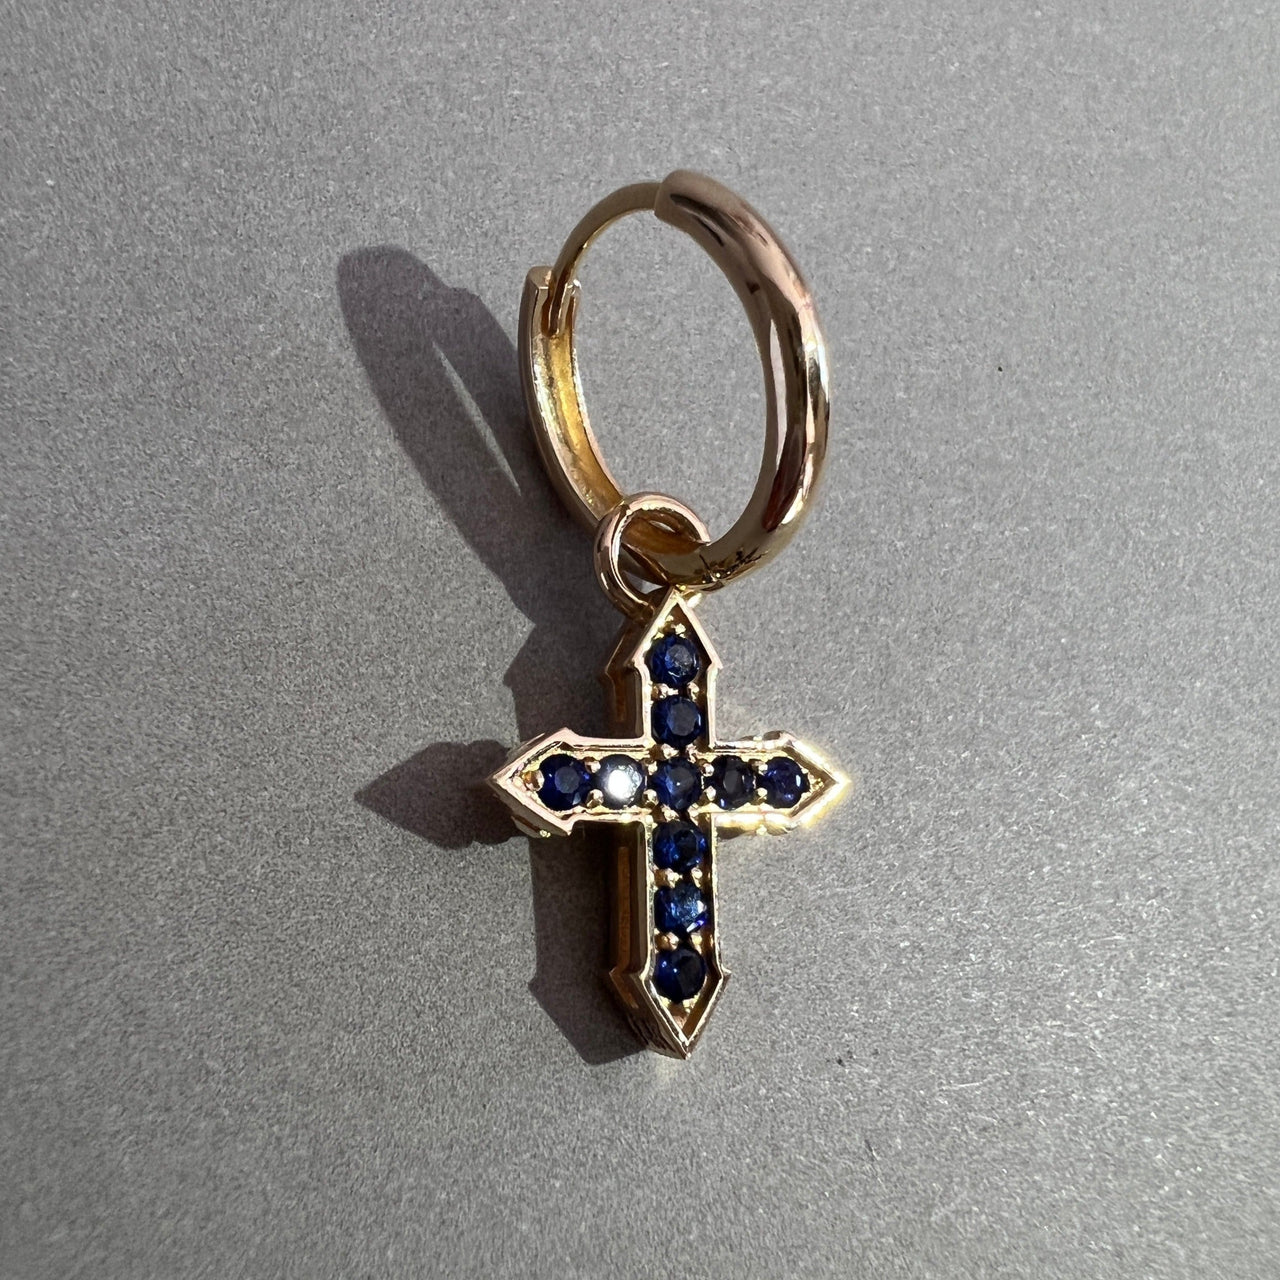 EARRING CROSS "GLOW" WITH BLUE SAPPHIRES / SOLID GOLD